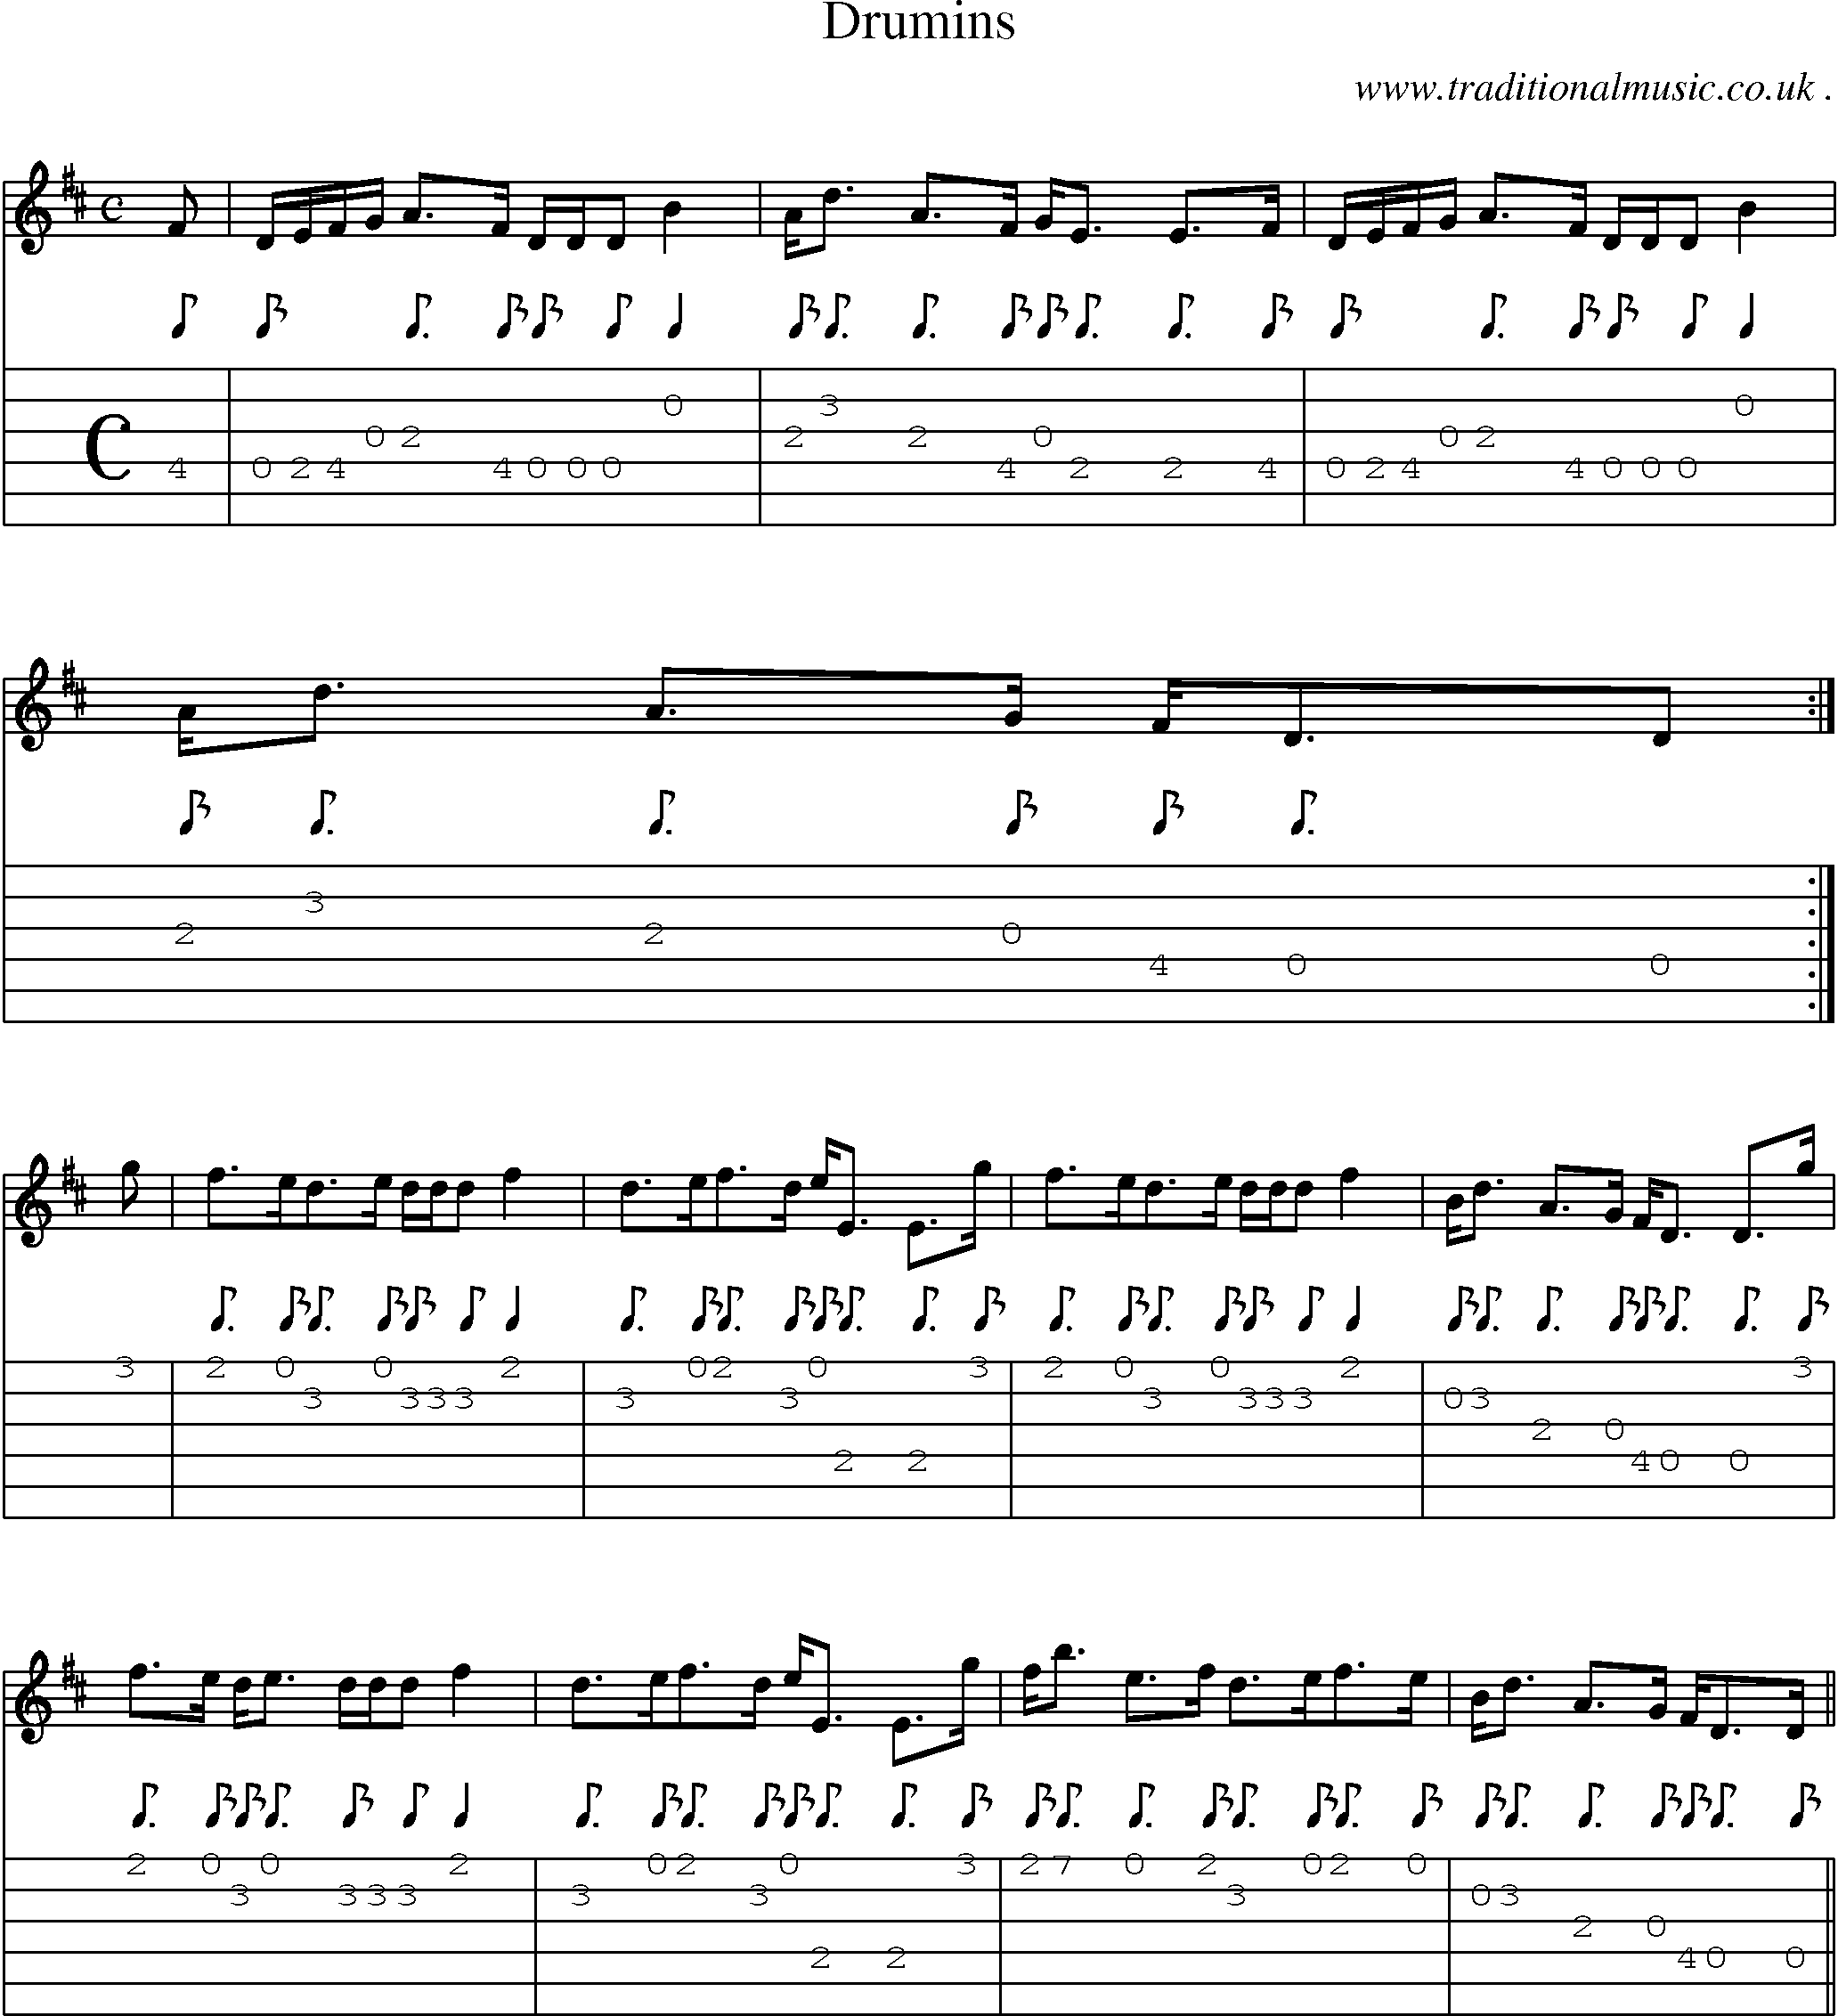 Sheet-music  score, Chords and Guitar Tabs for Drumins